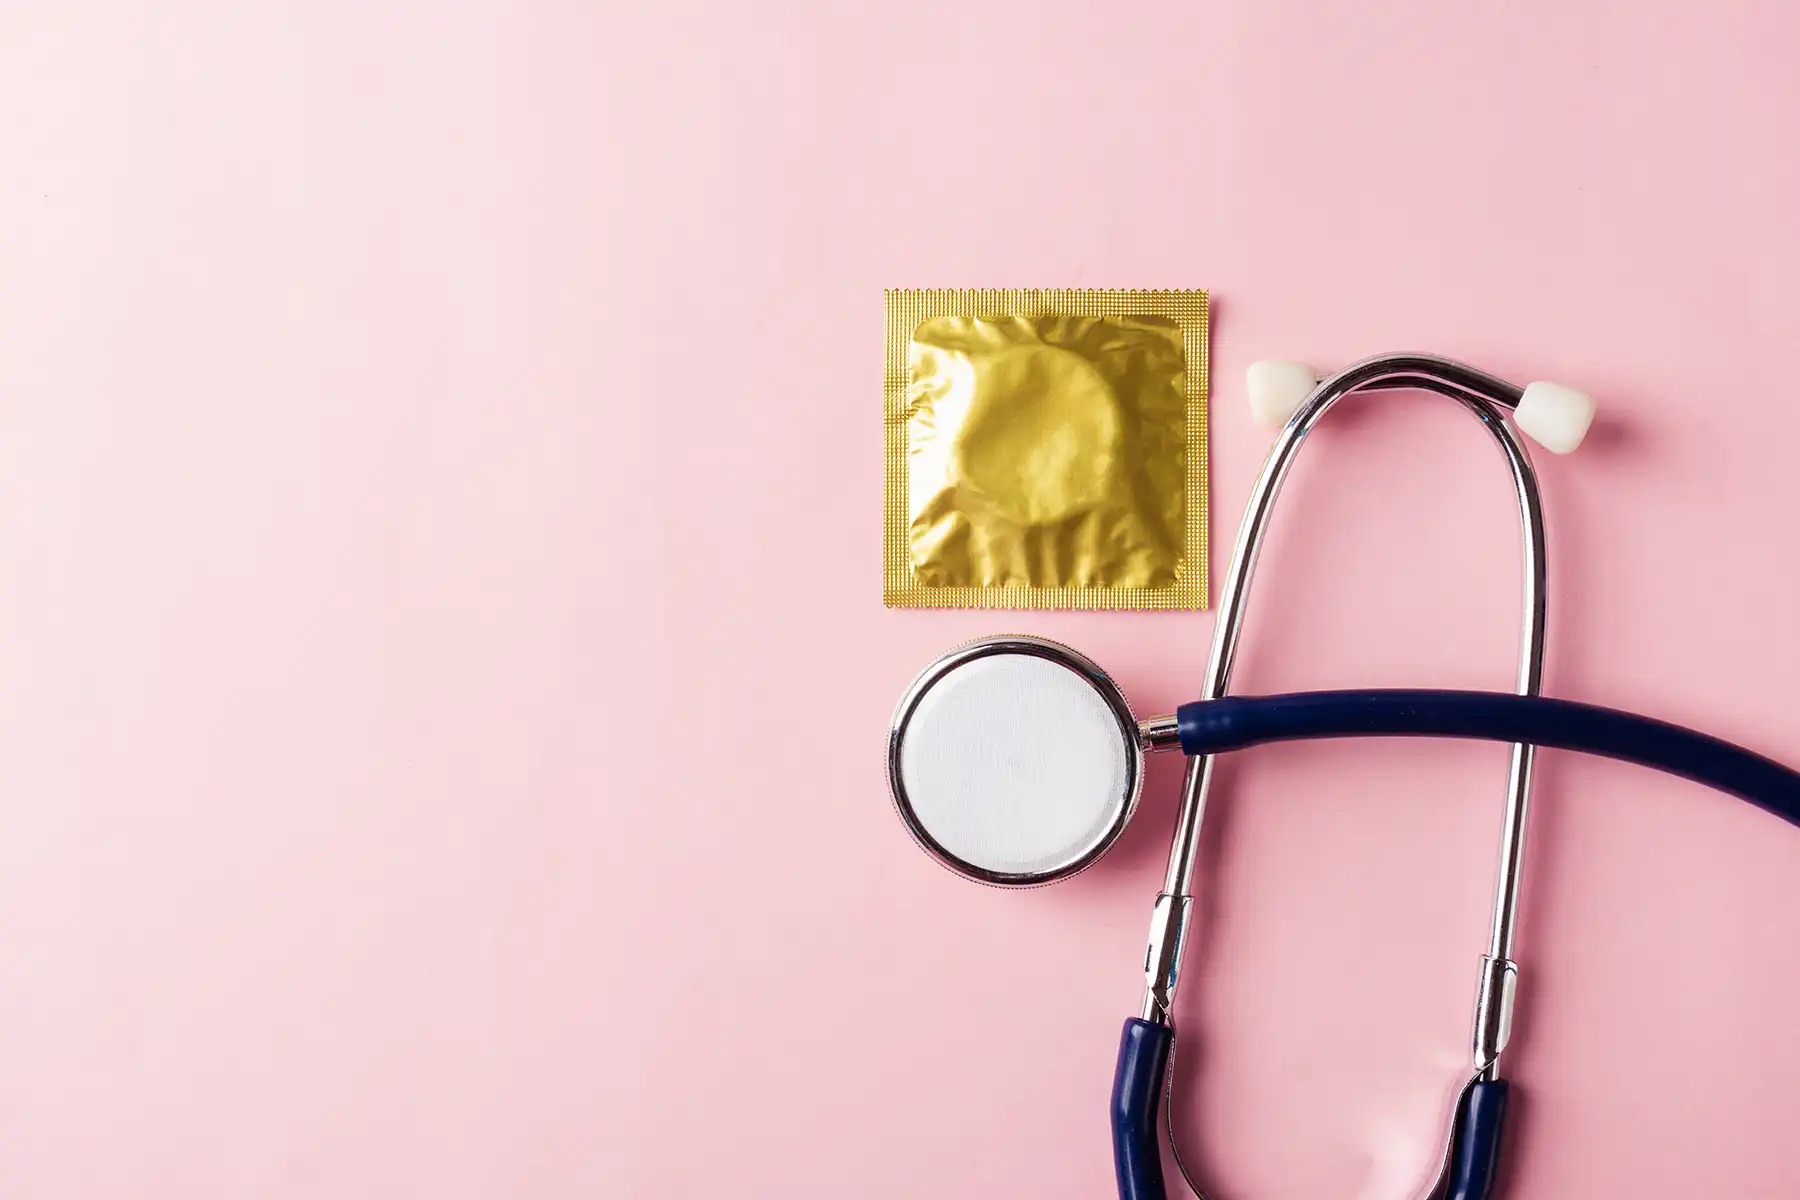 A condom with a gold wrapper and a stethoscope on a pink background.